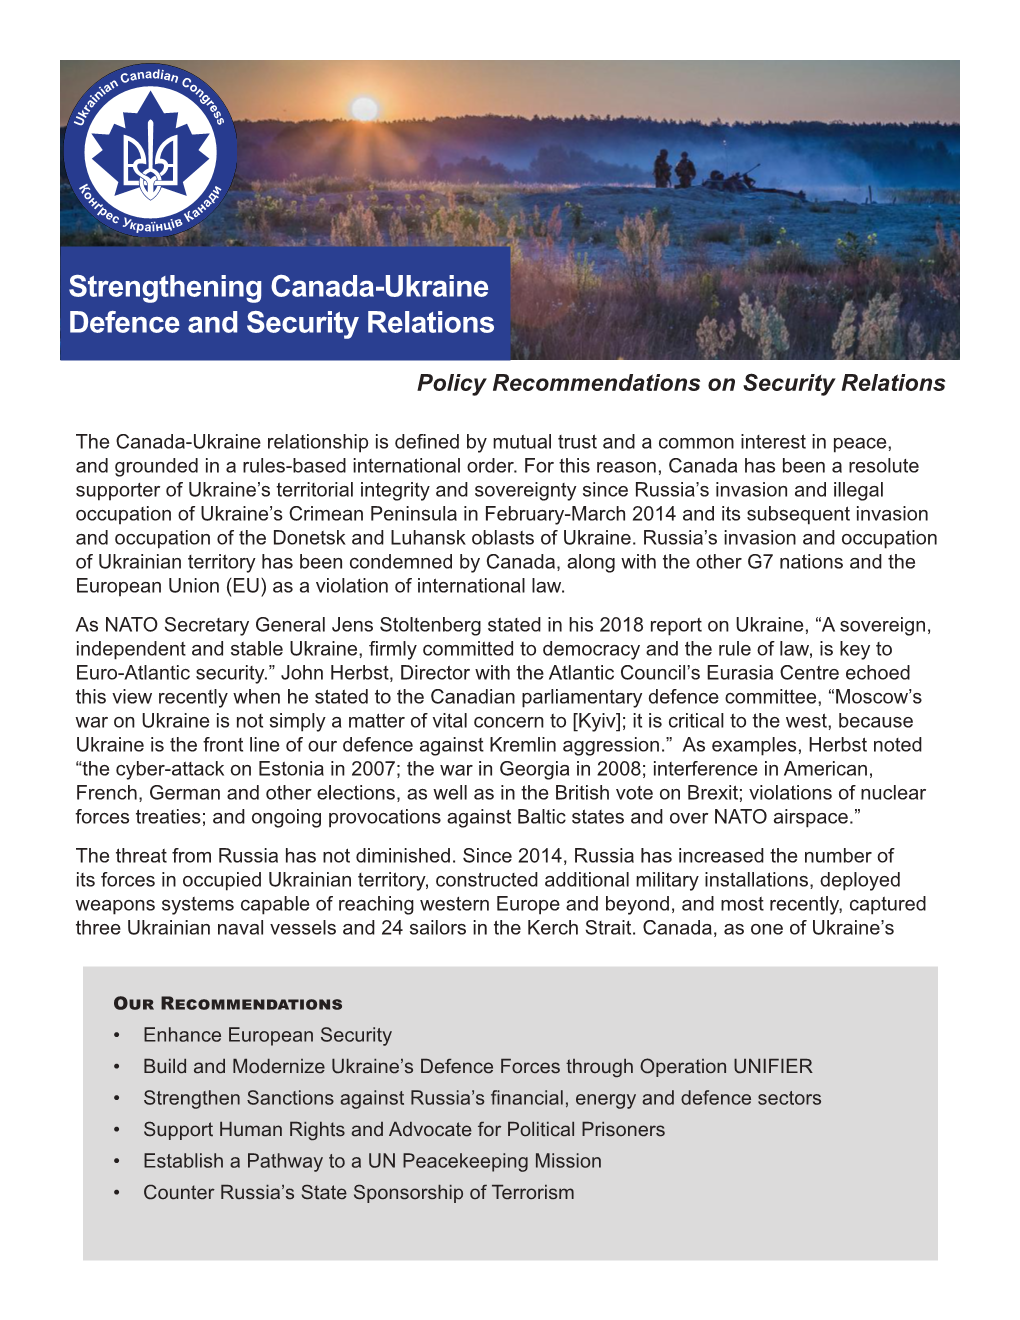 Strengthening Canada-Ukraine Defence and Security Relations